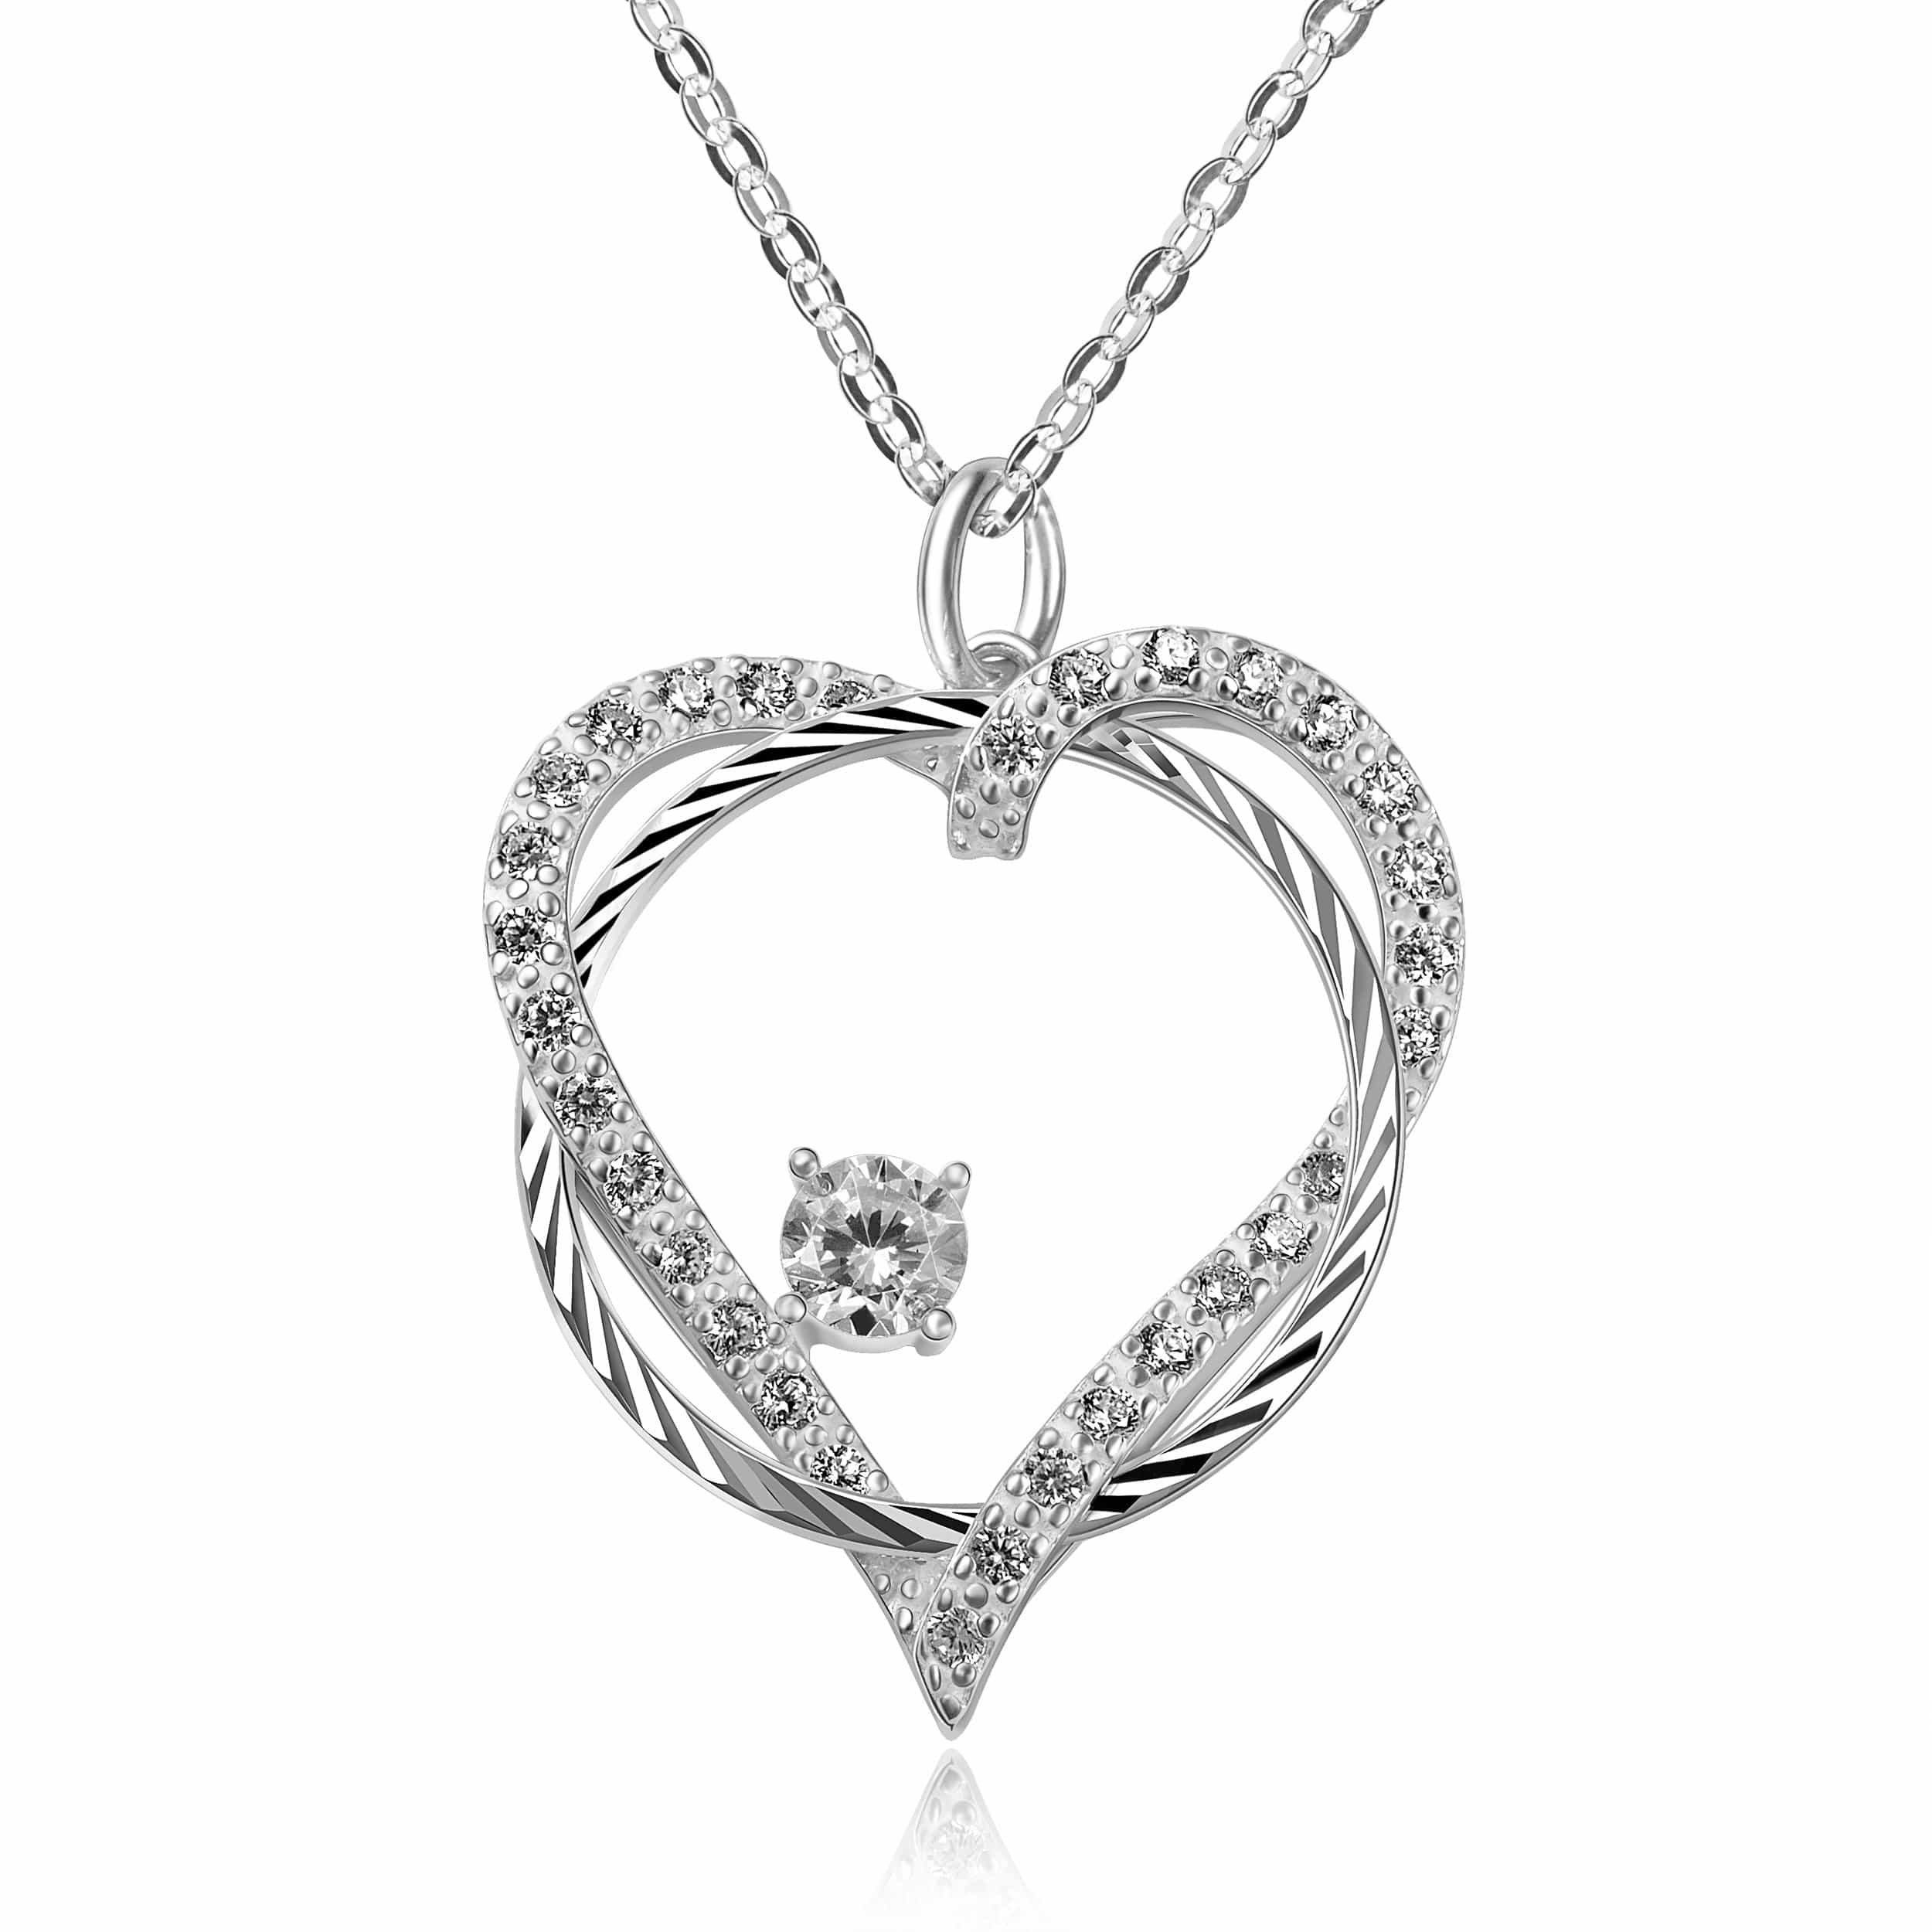 Circle Interlocked Heart Necklace Sterling Silver Pendant Necklace Pendant + Chain